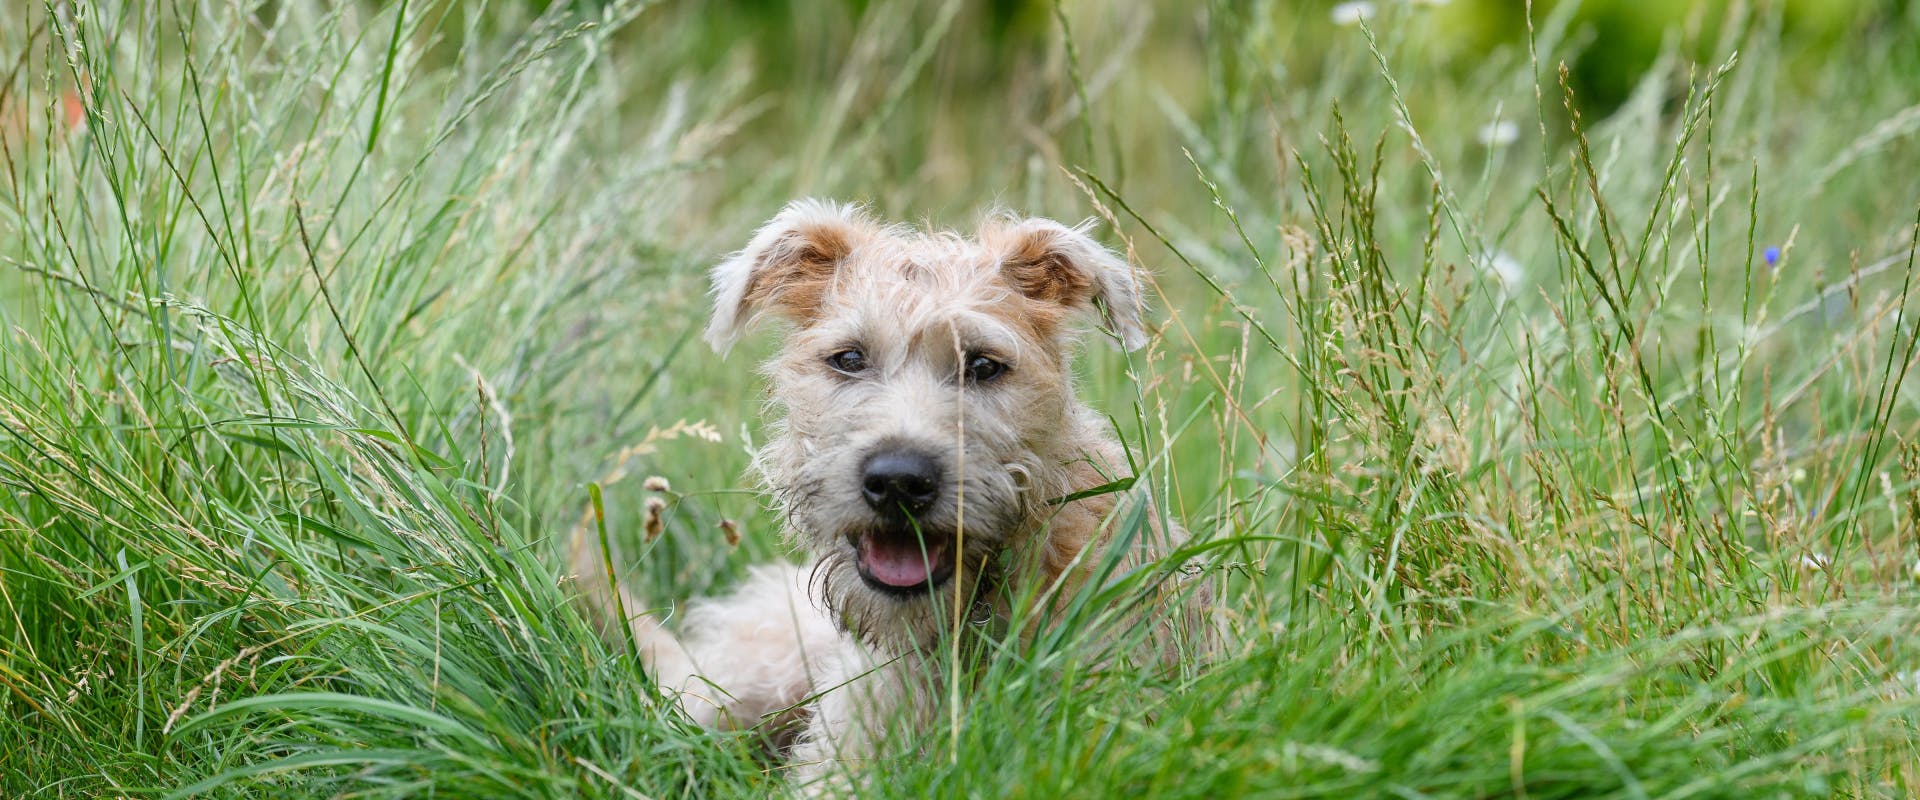 A Soft-Coated Wheaten Terrier.